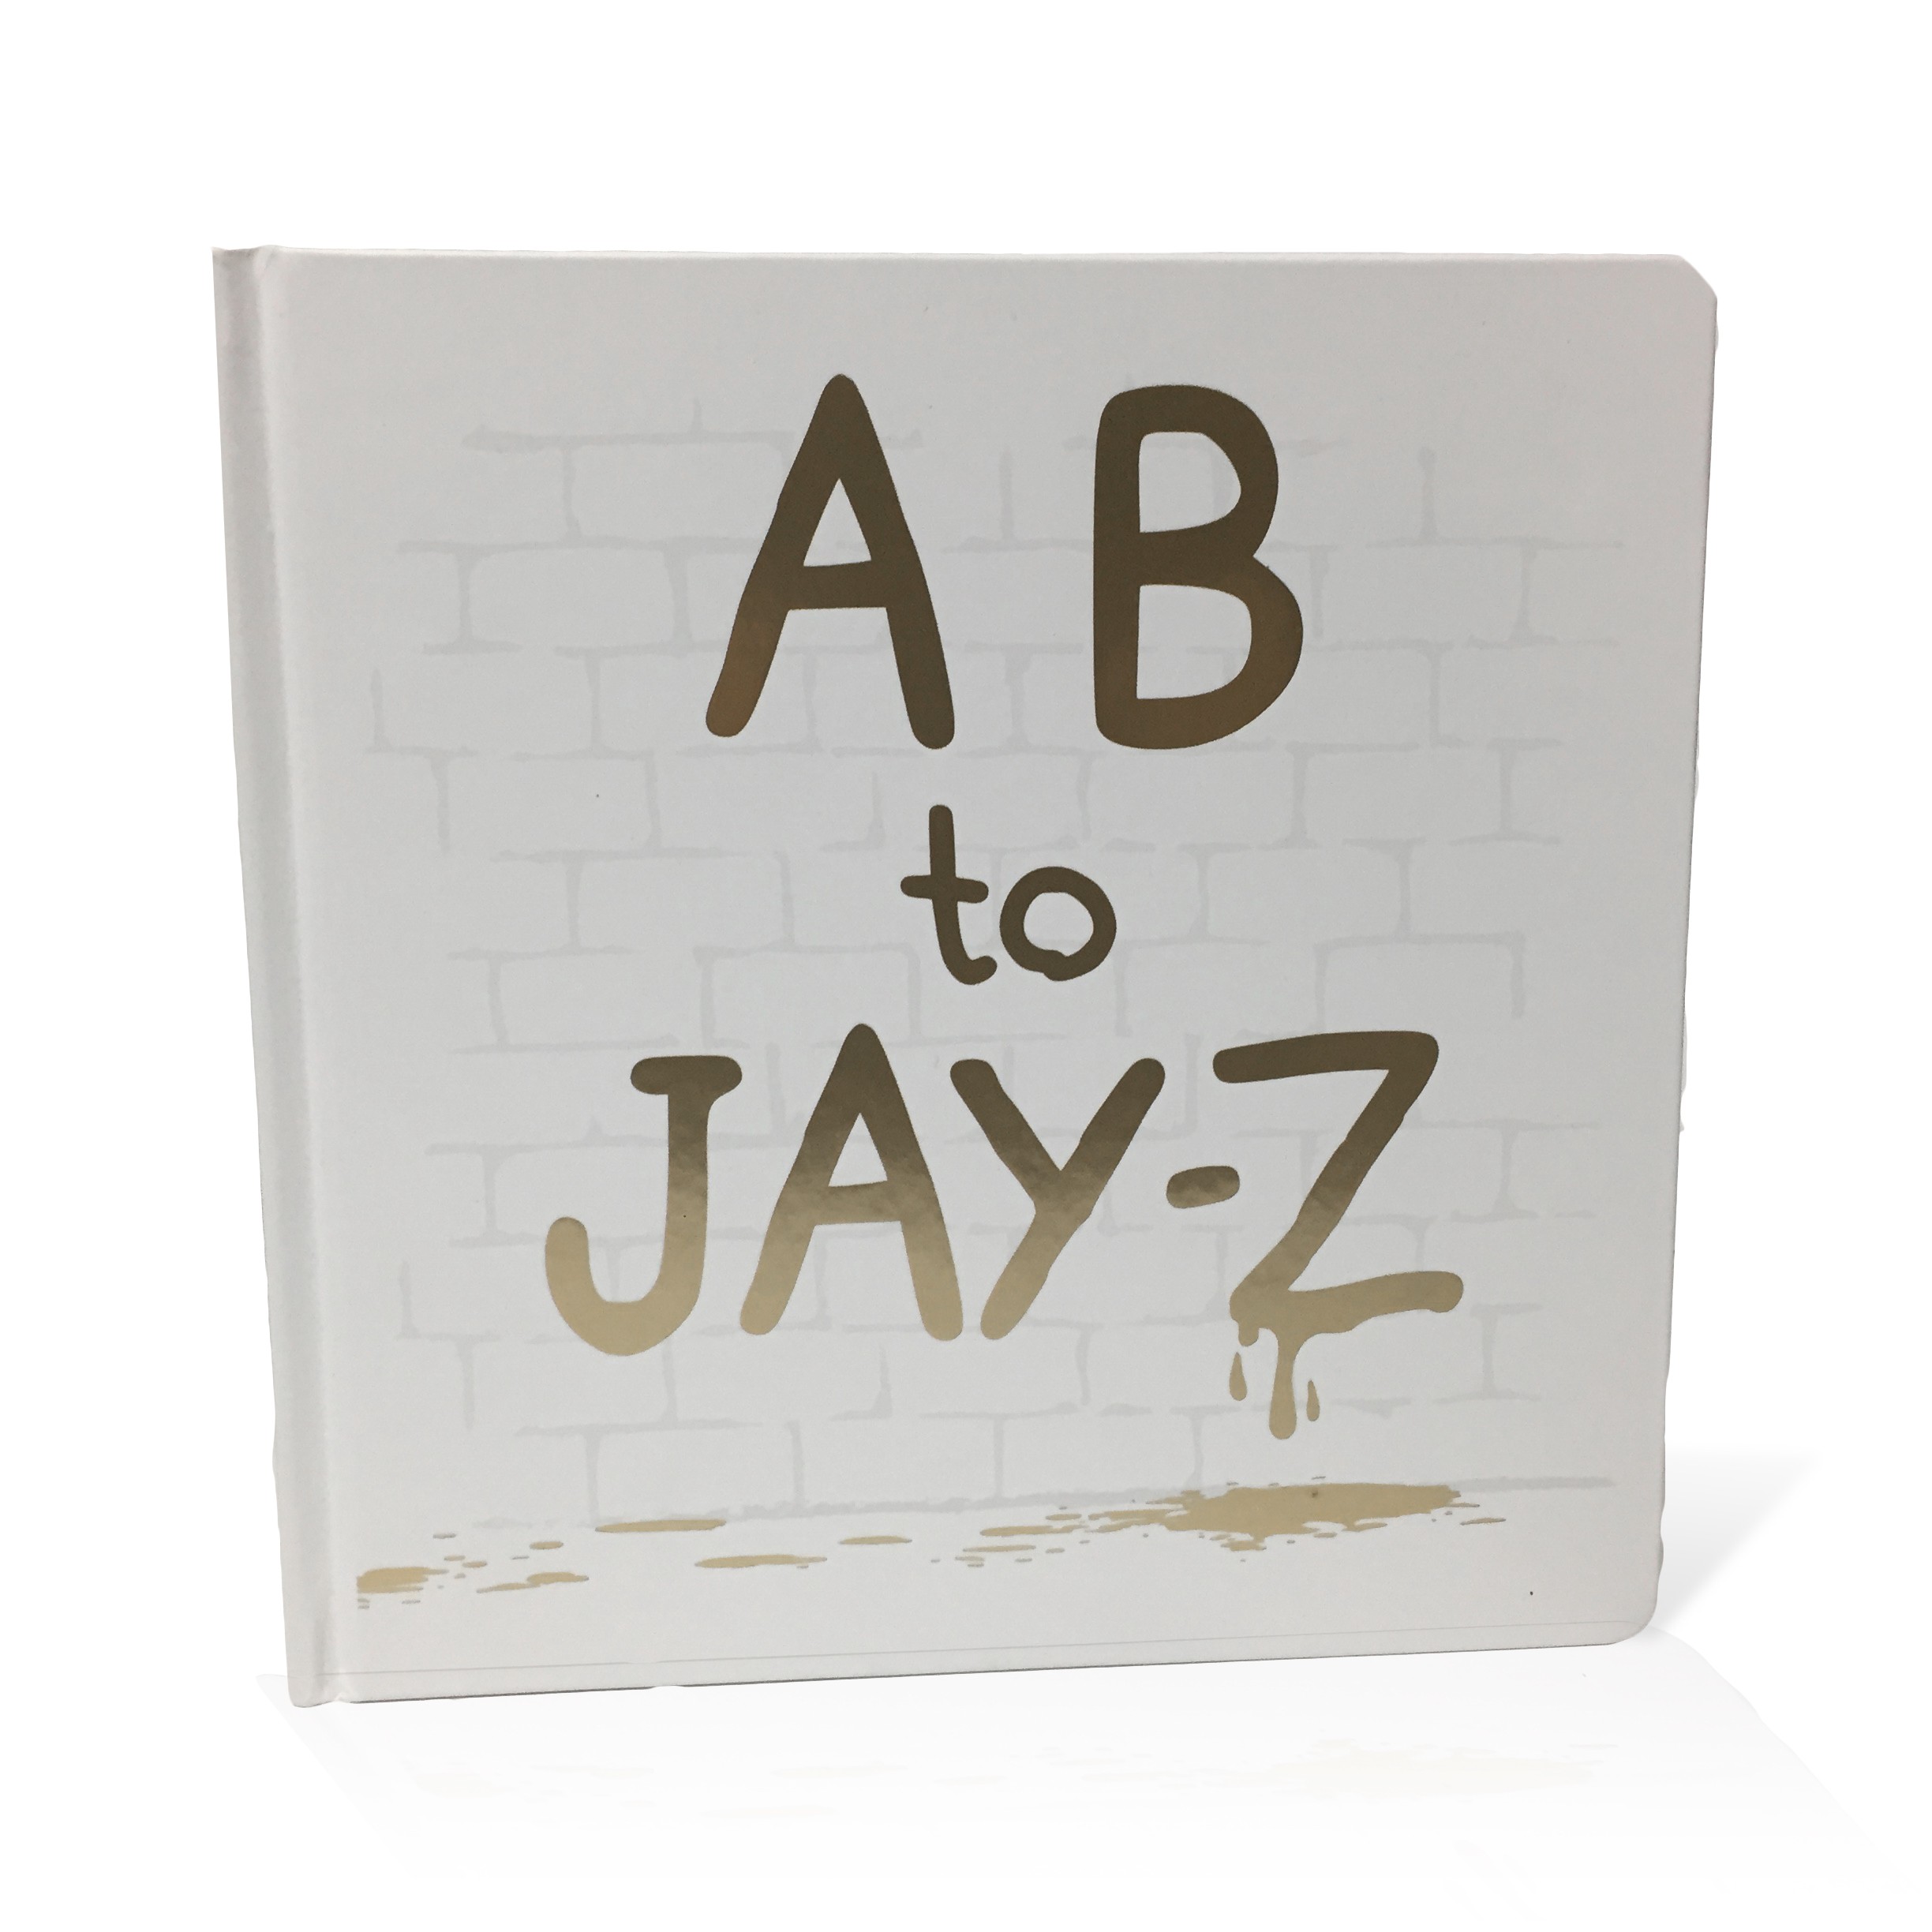 A B to Jay-Z, $29.95